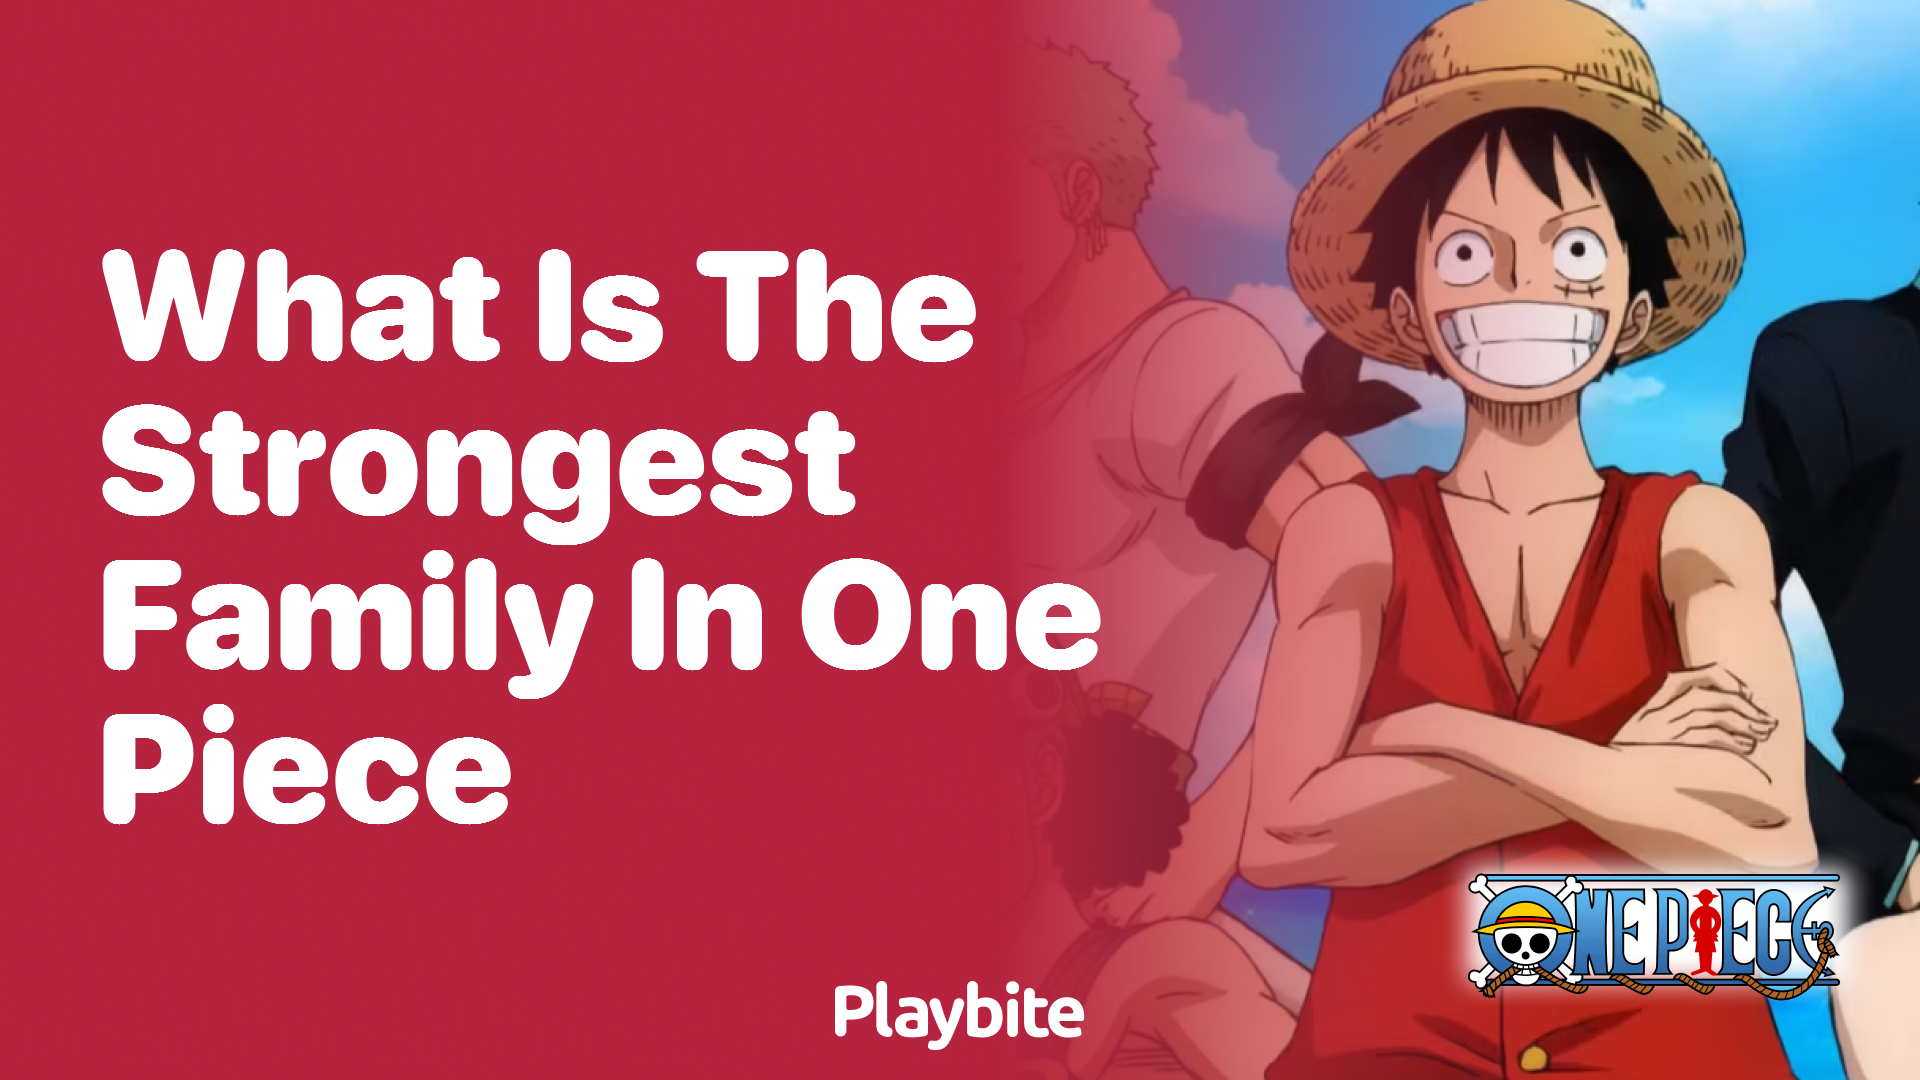 What is the Strongest Family in One Piece?